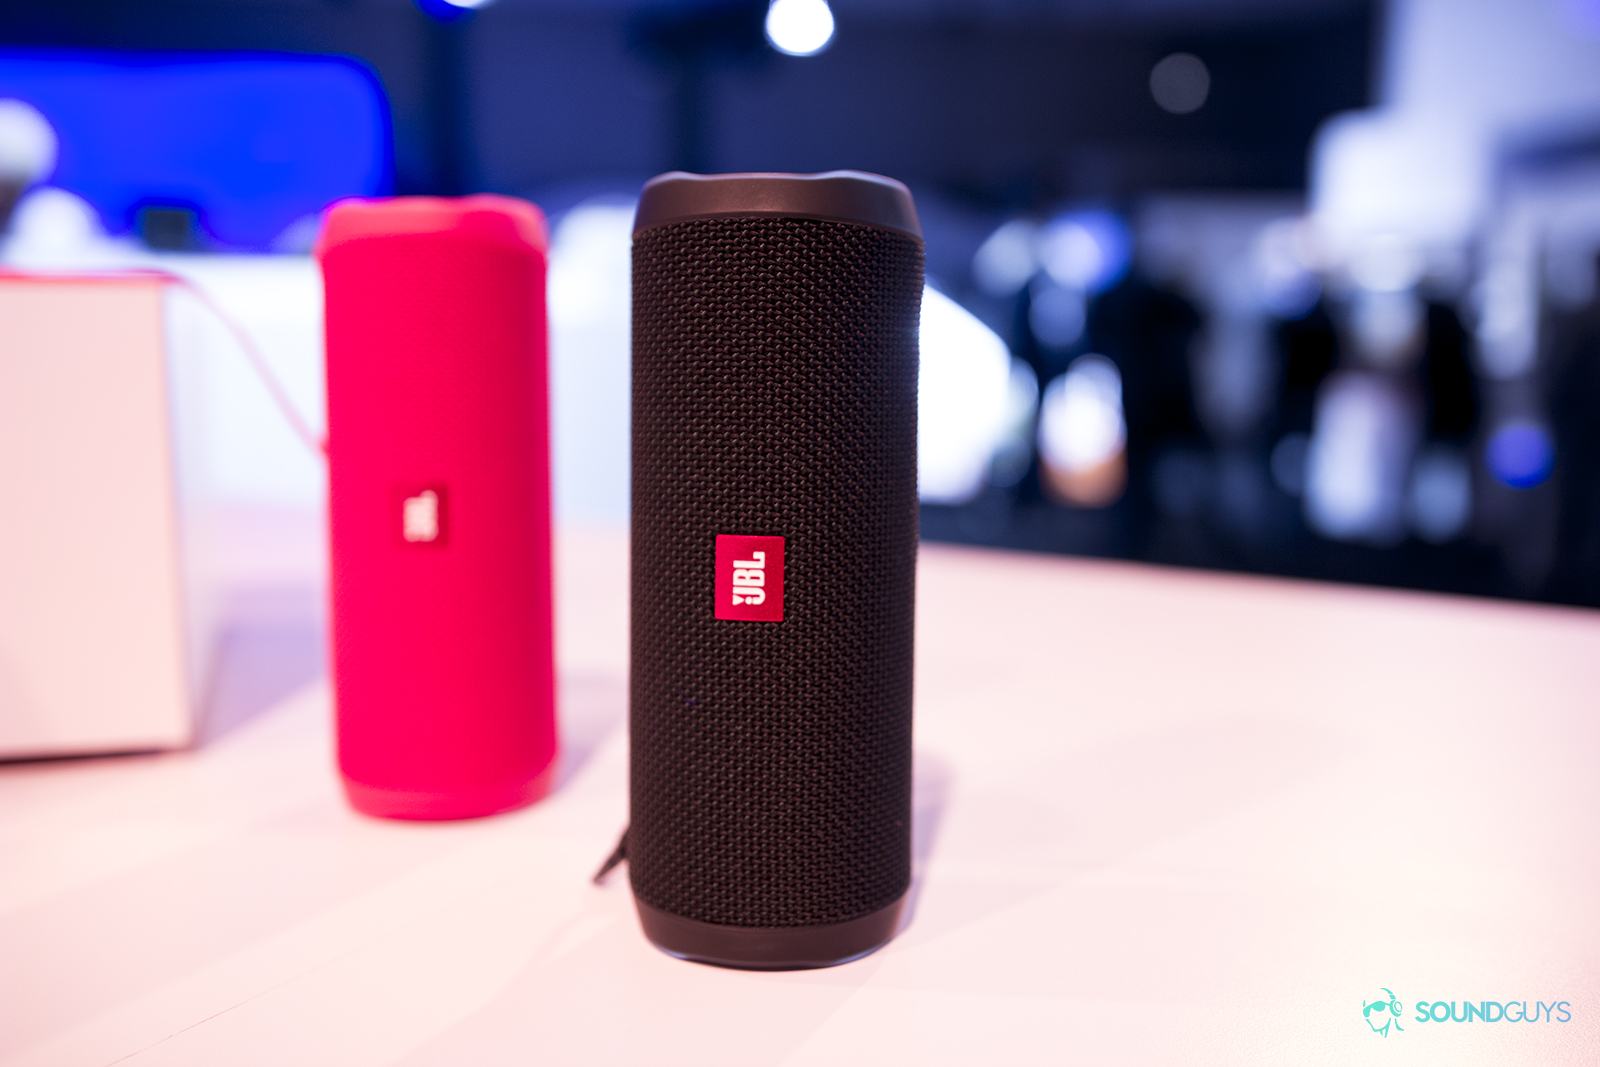 Two JBL speakers on a table top